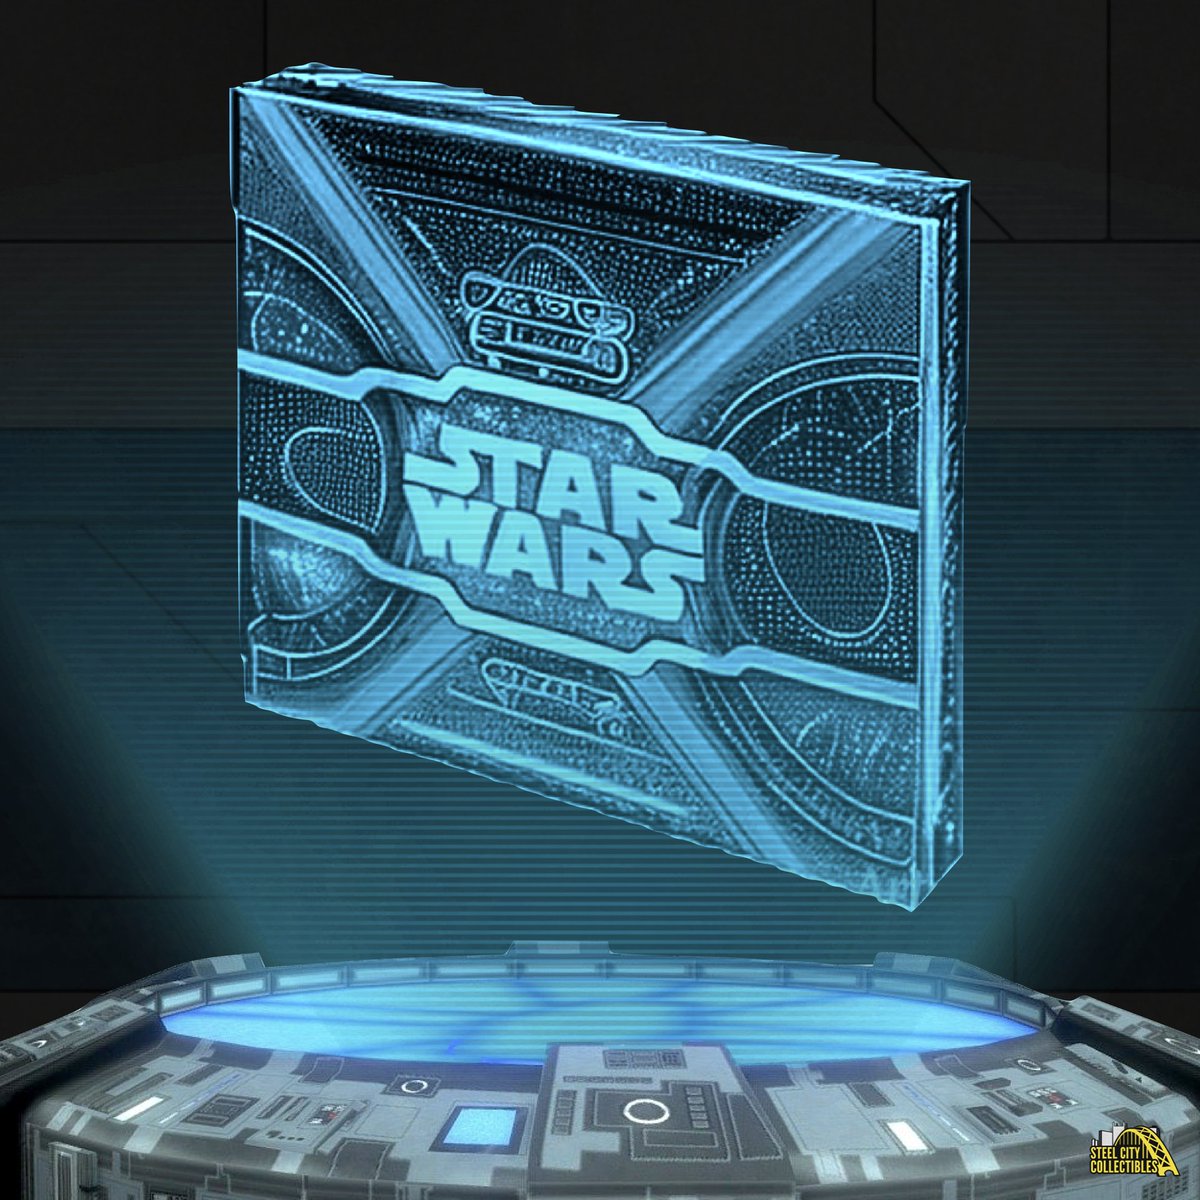 🚀 STAR WARS GIVEAWAY 🪐 RETWEET, LIKE, & FOLLOW @SCCTradingCards for your chance to win a 2023 Topps Star Wars Chrome Black Hobby Box! Find one autograph in each box! Want extra entries? Get 1 additional entry for each friend you tag! #StarWars #Topps #Maythe4thBeWithYou